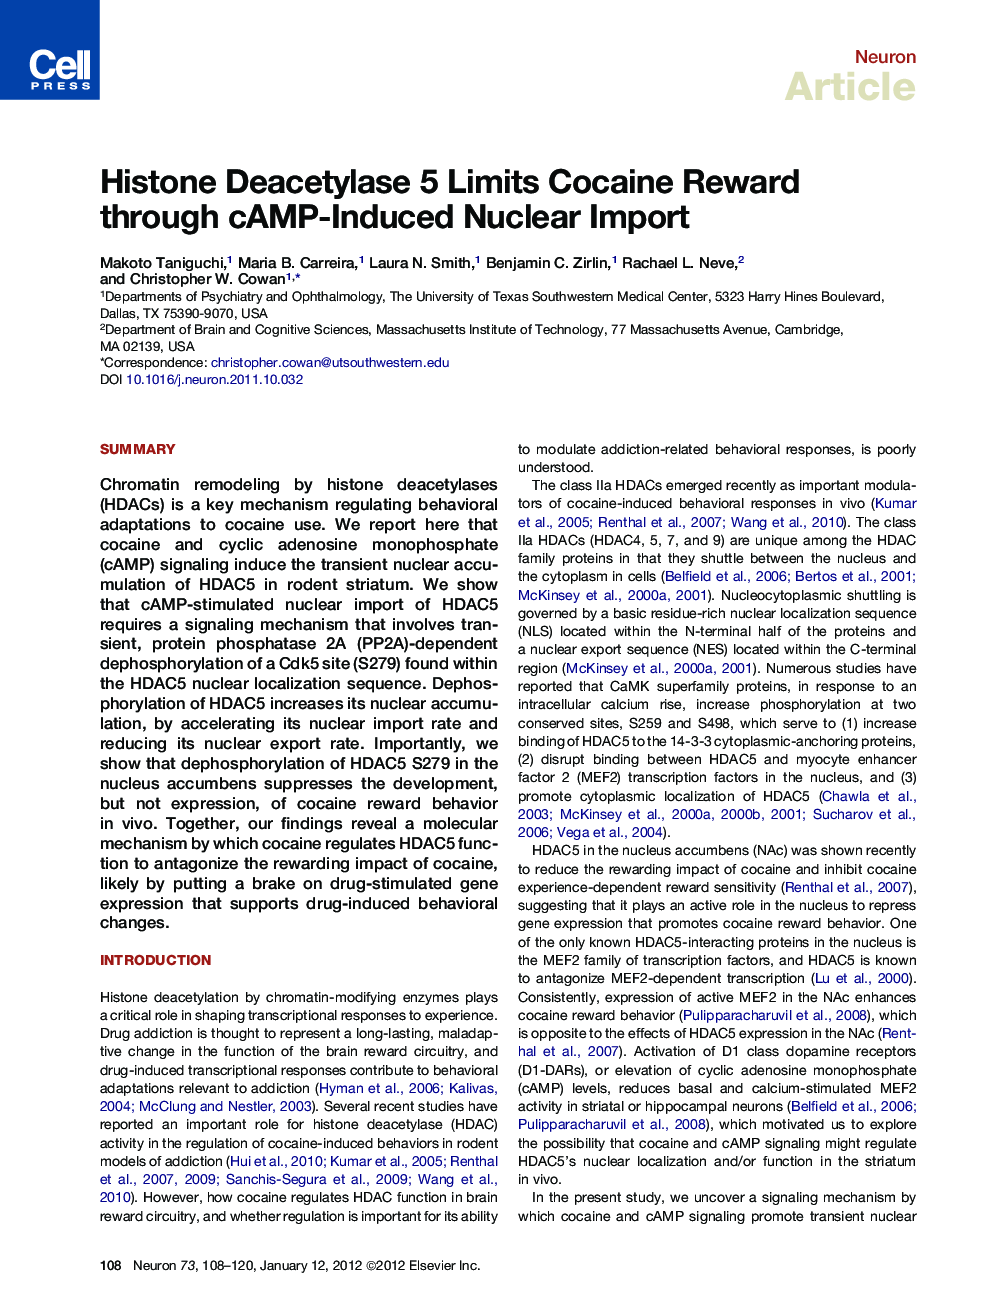 Histone Deacetylase 5 Limits Cocaine Reward through cAMP-Induced Nuclear Import